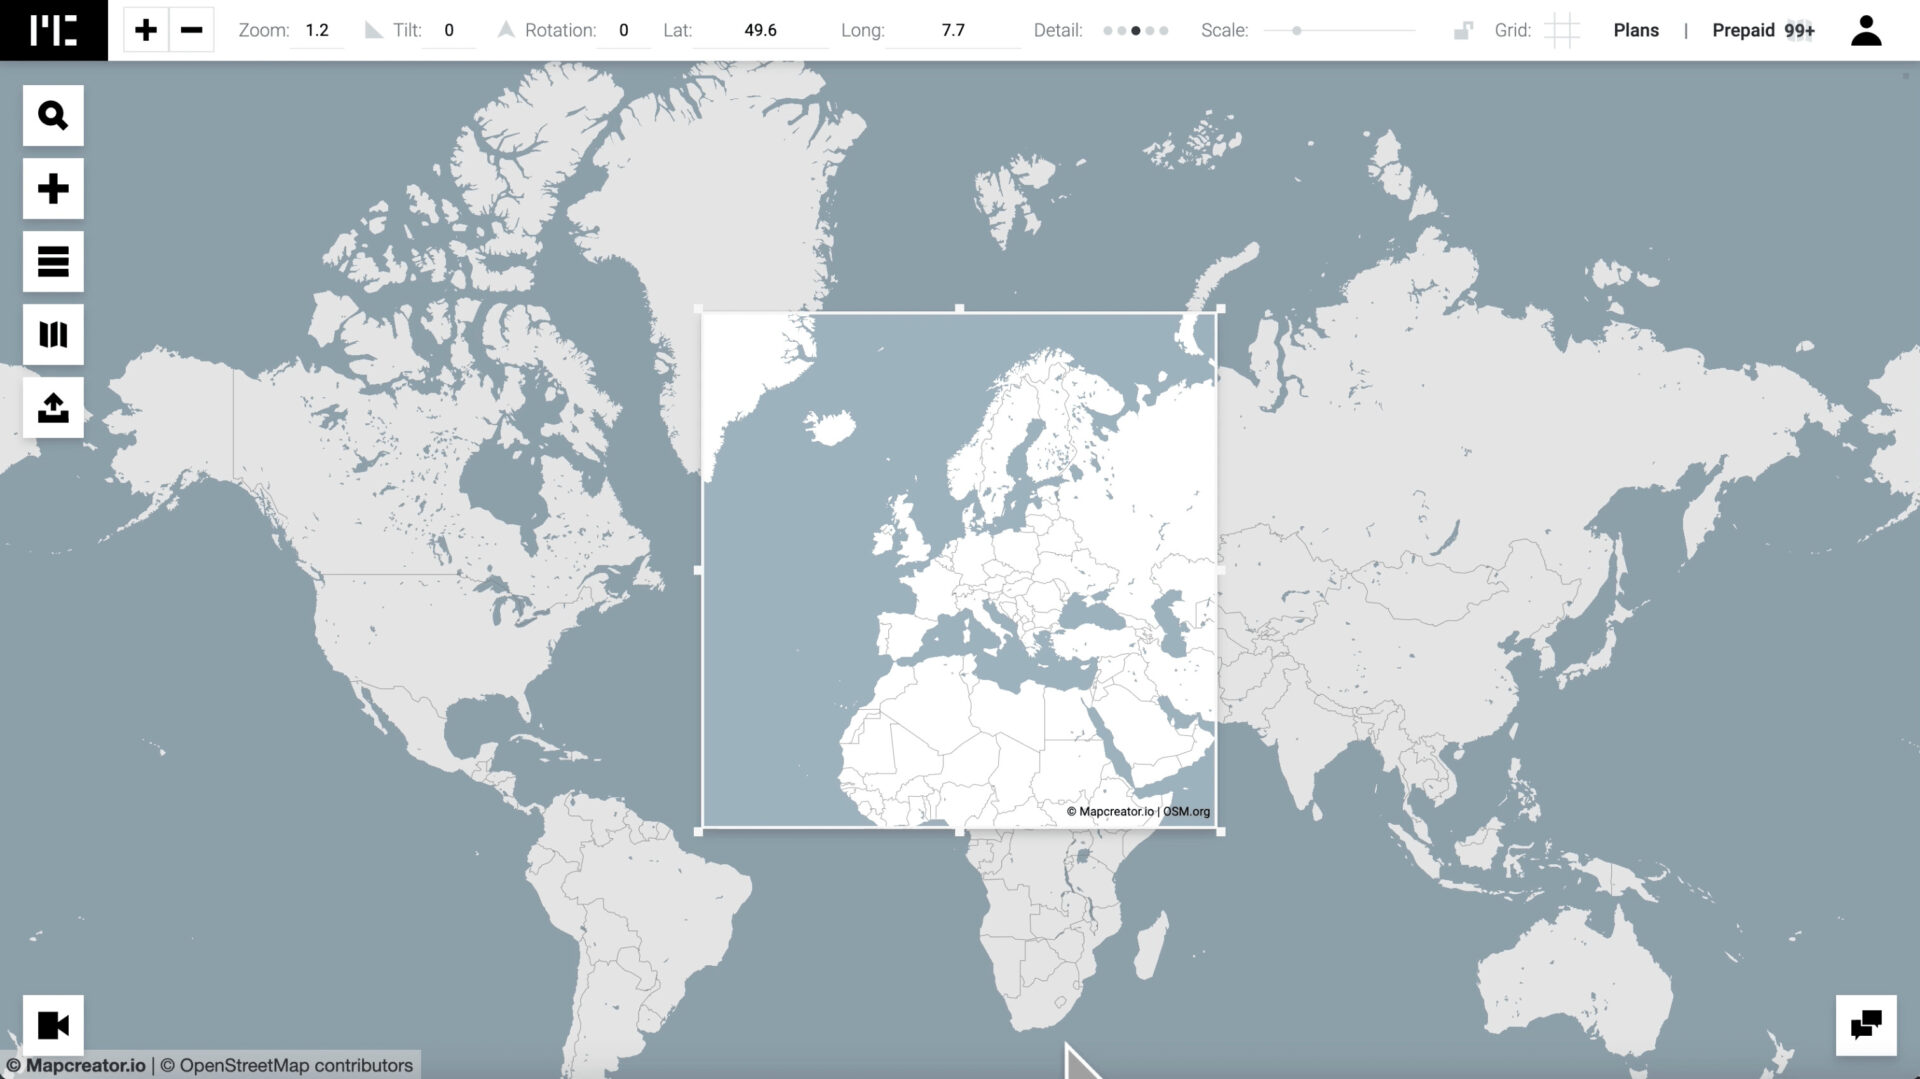 Anyone create maps - Online mapping tool - Mapcreator